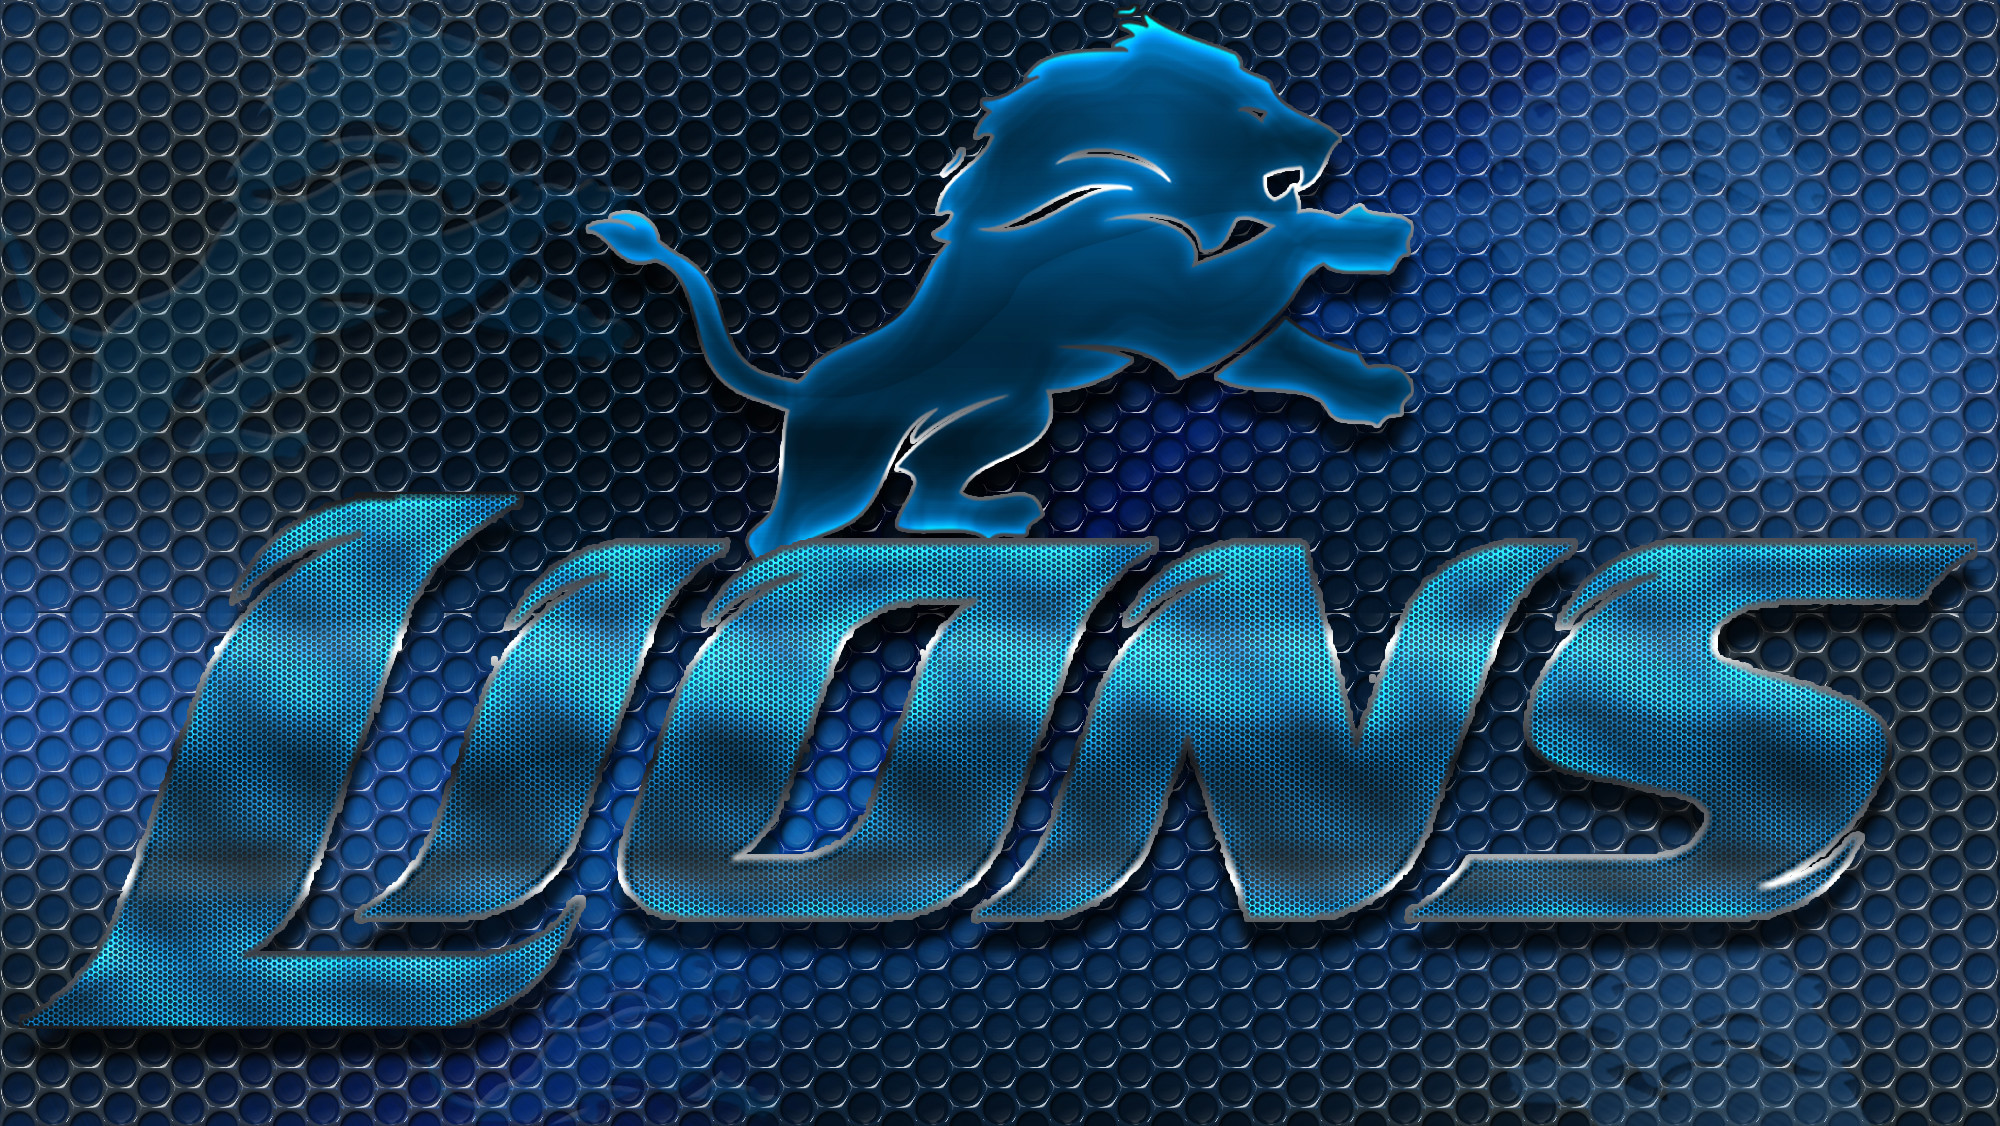 2000x1126 13 Detroit Lions HD Wallpapers | Backgrounds - Wallpaper Abyss .